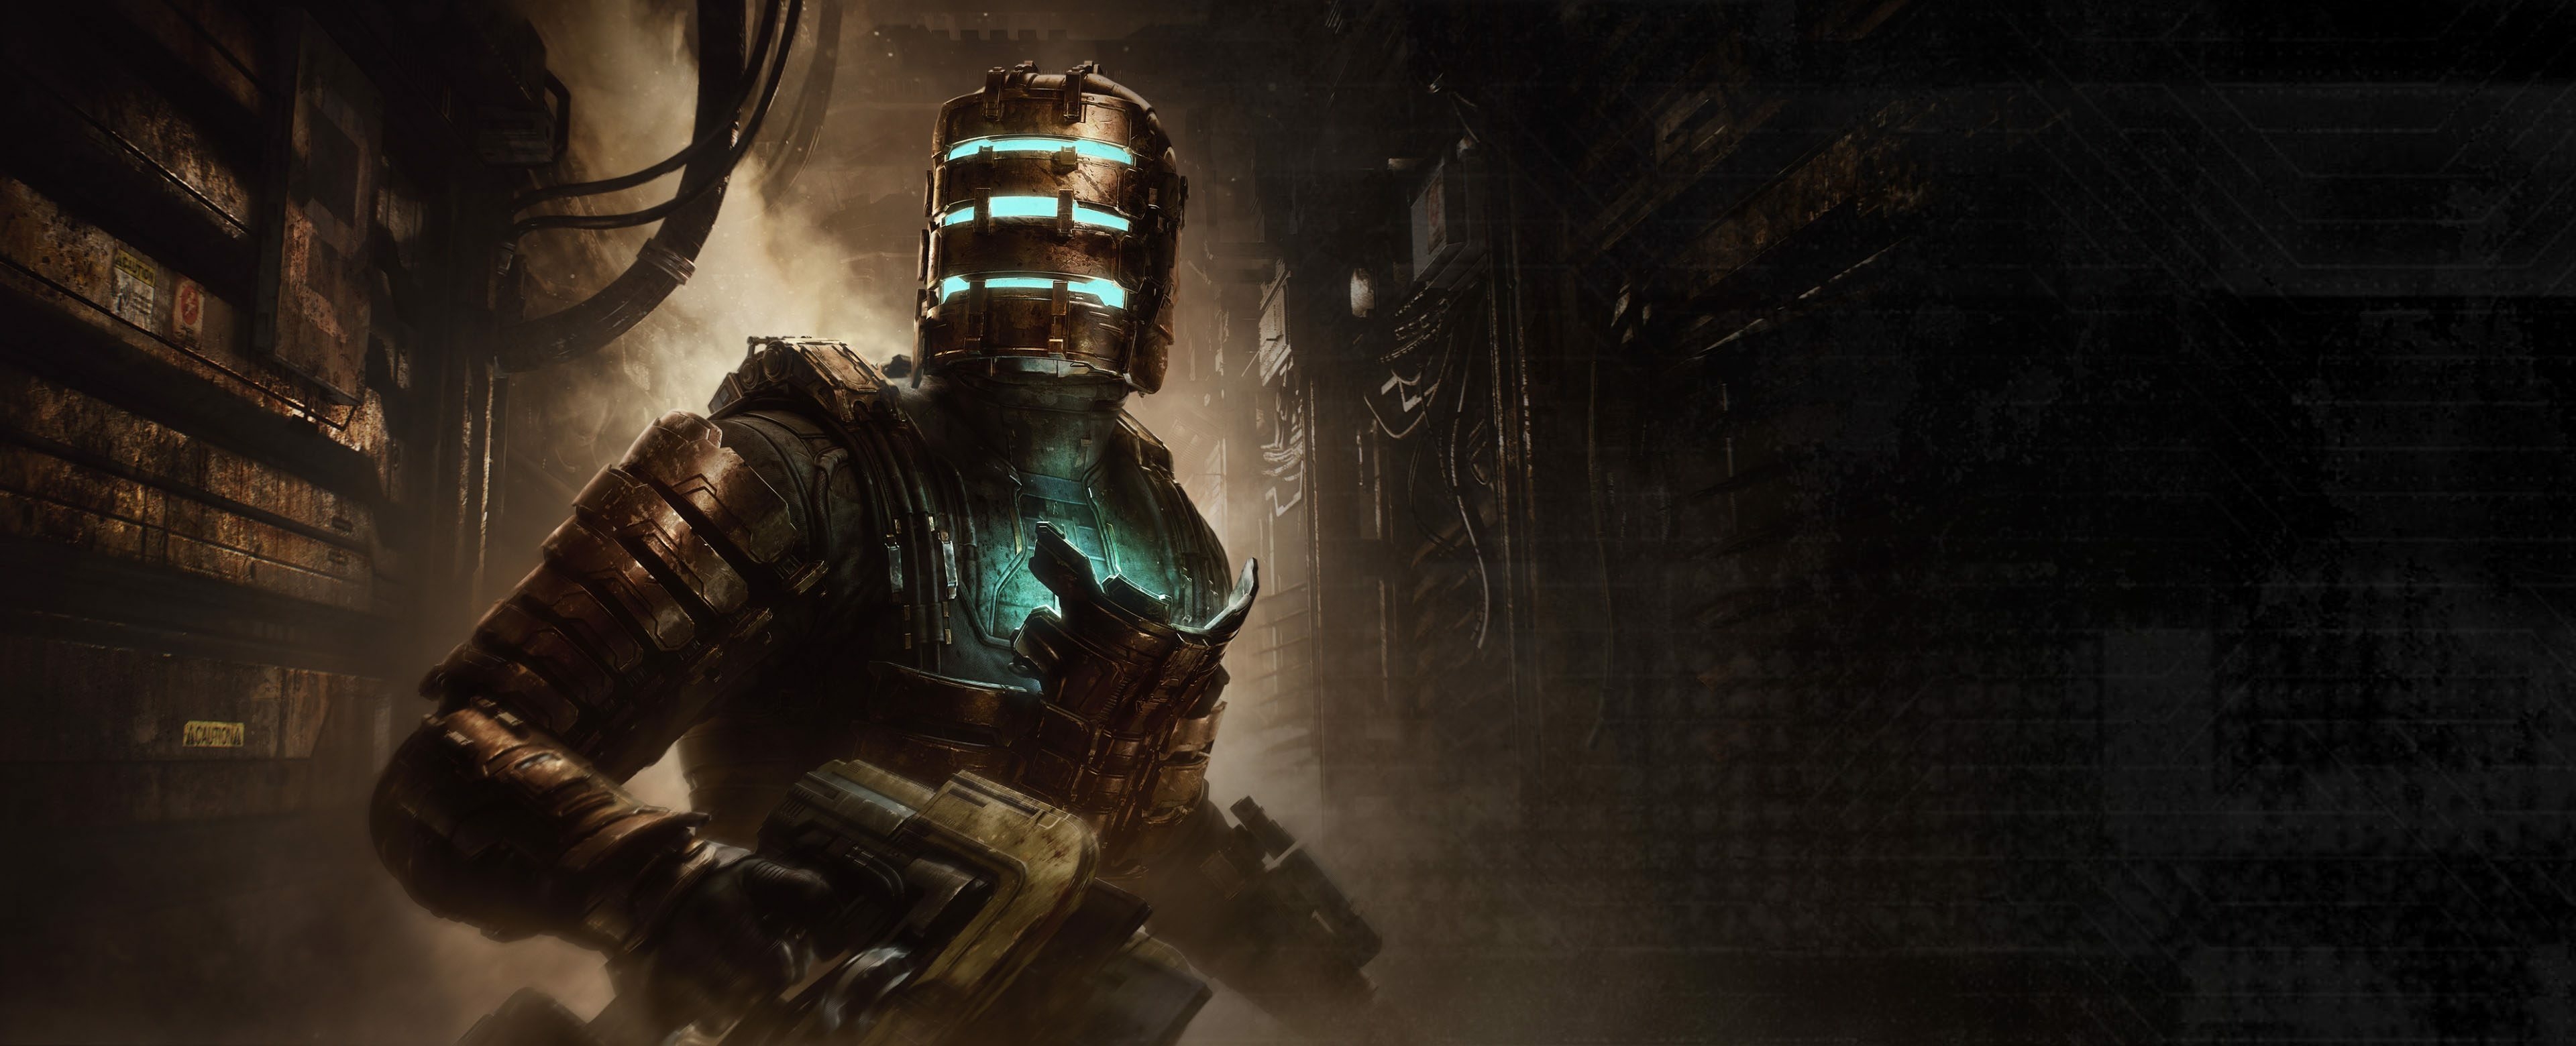 Dead Space 2023 Wallpaper, HD Games 4K Wallpapers, Images and